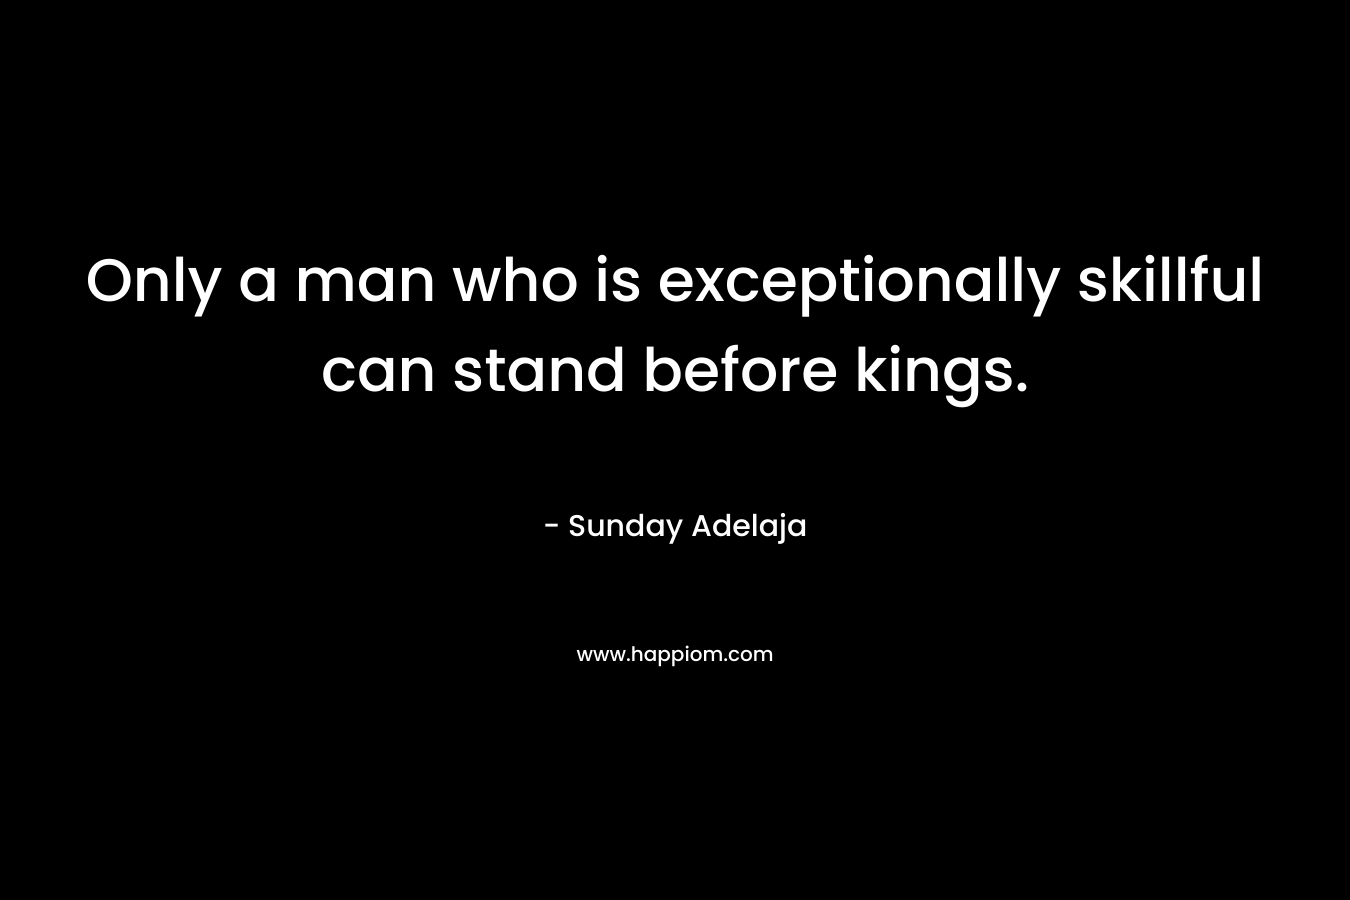 Only a man who is exceptionally skillful can stand before kings.